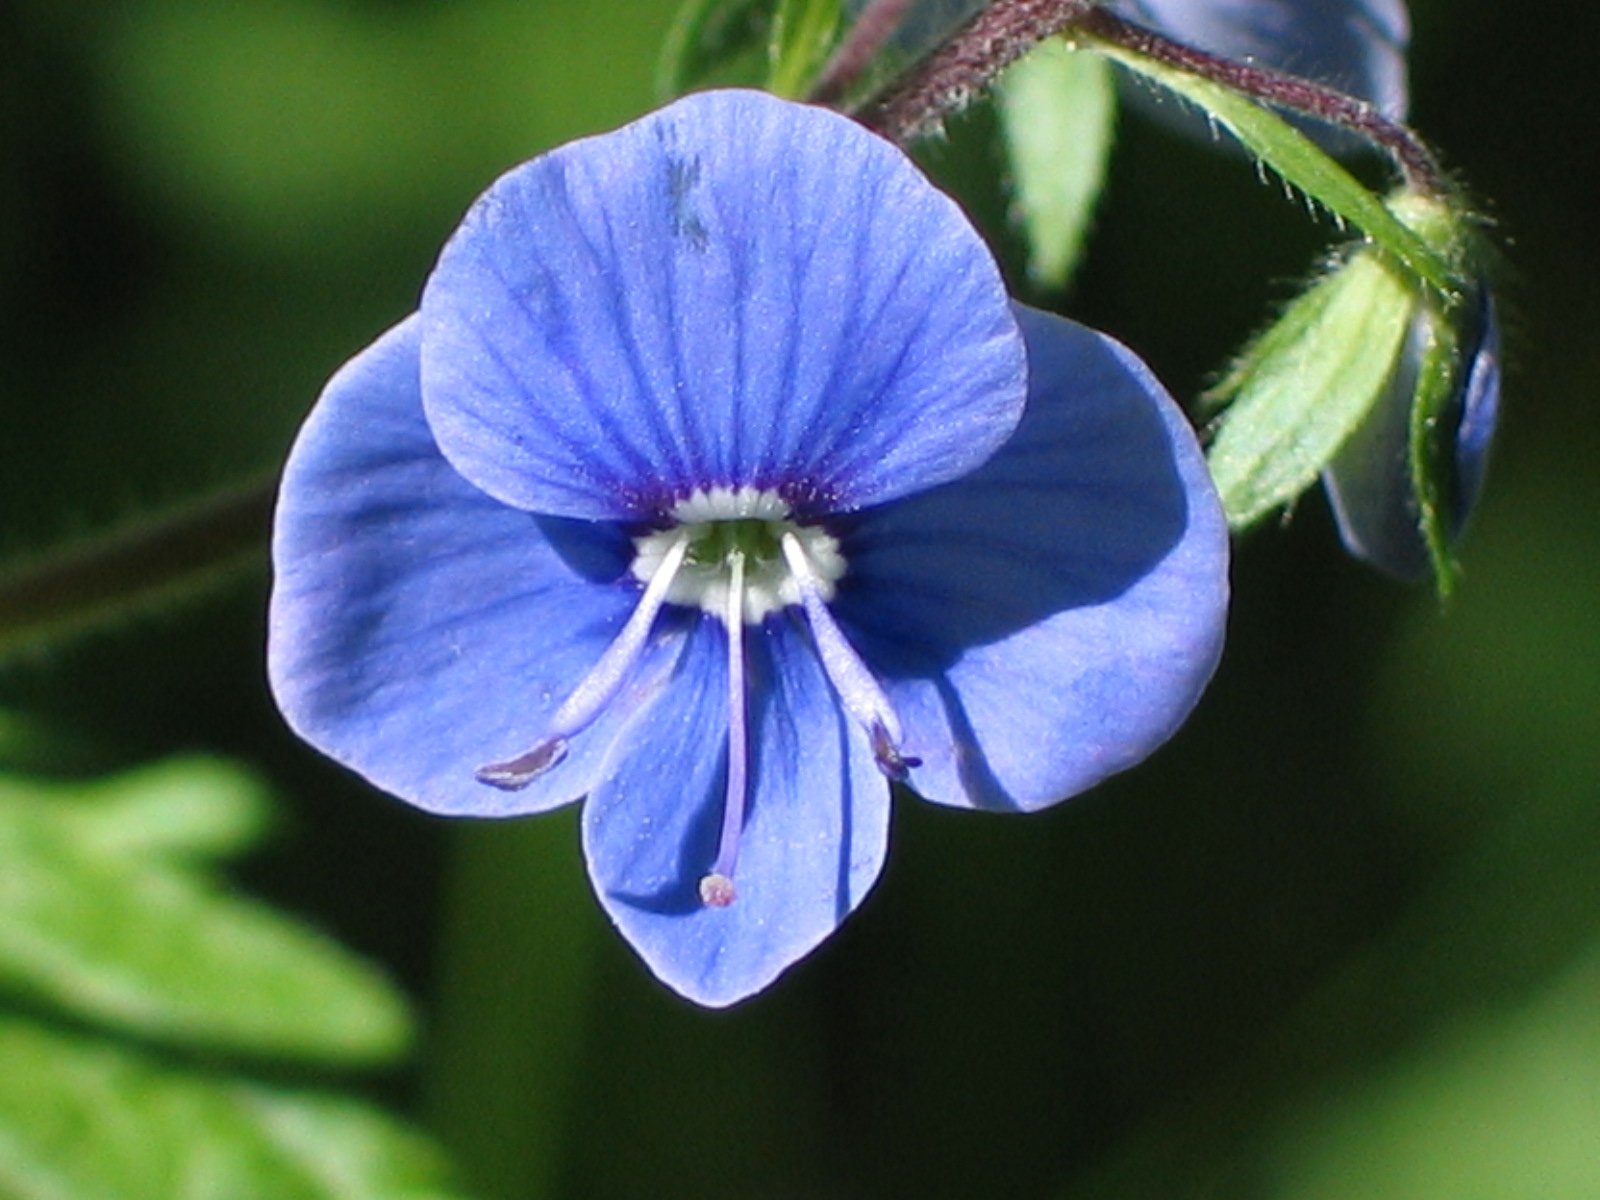 a blue flower that is growing near some leaves